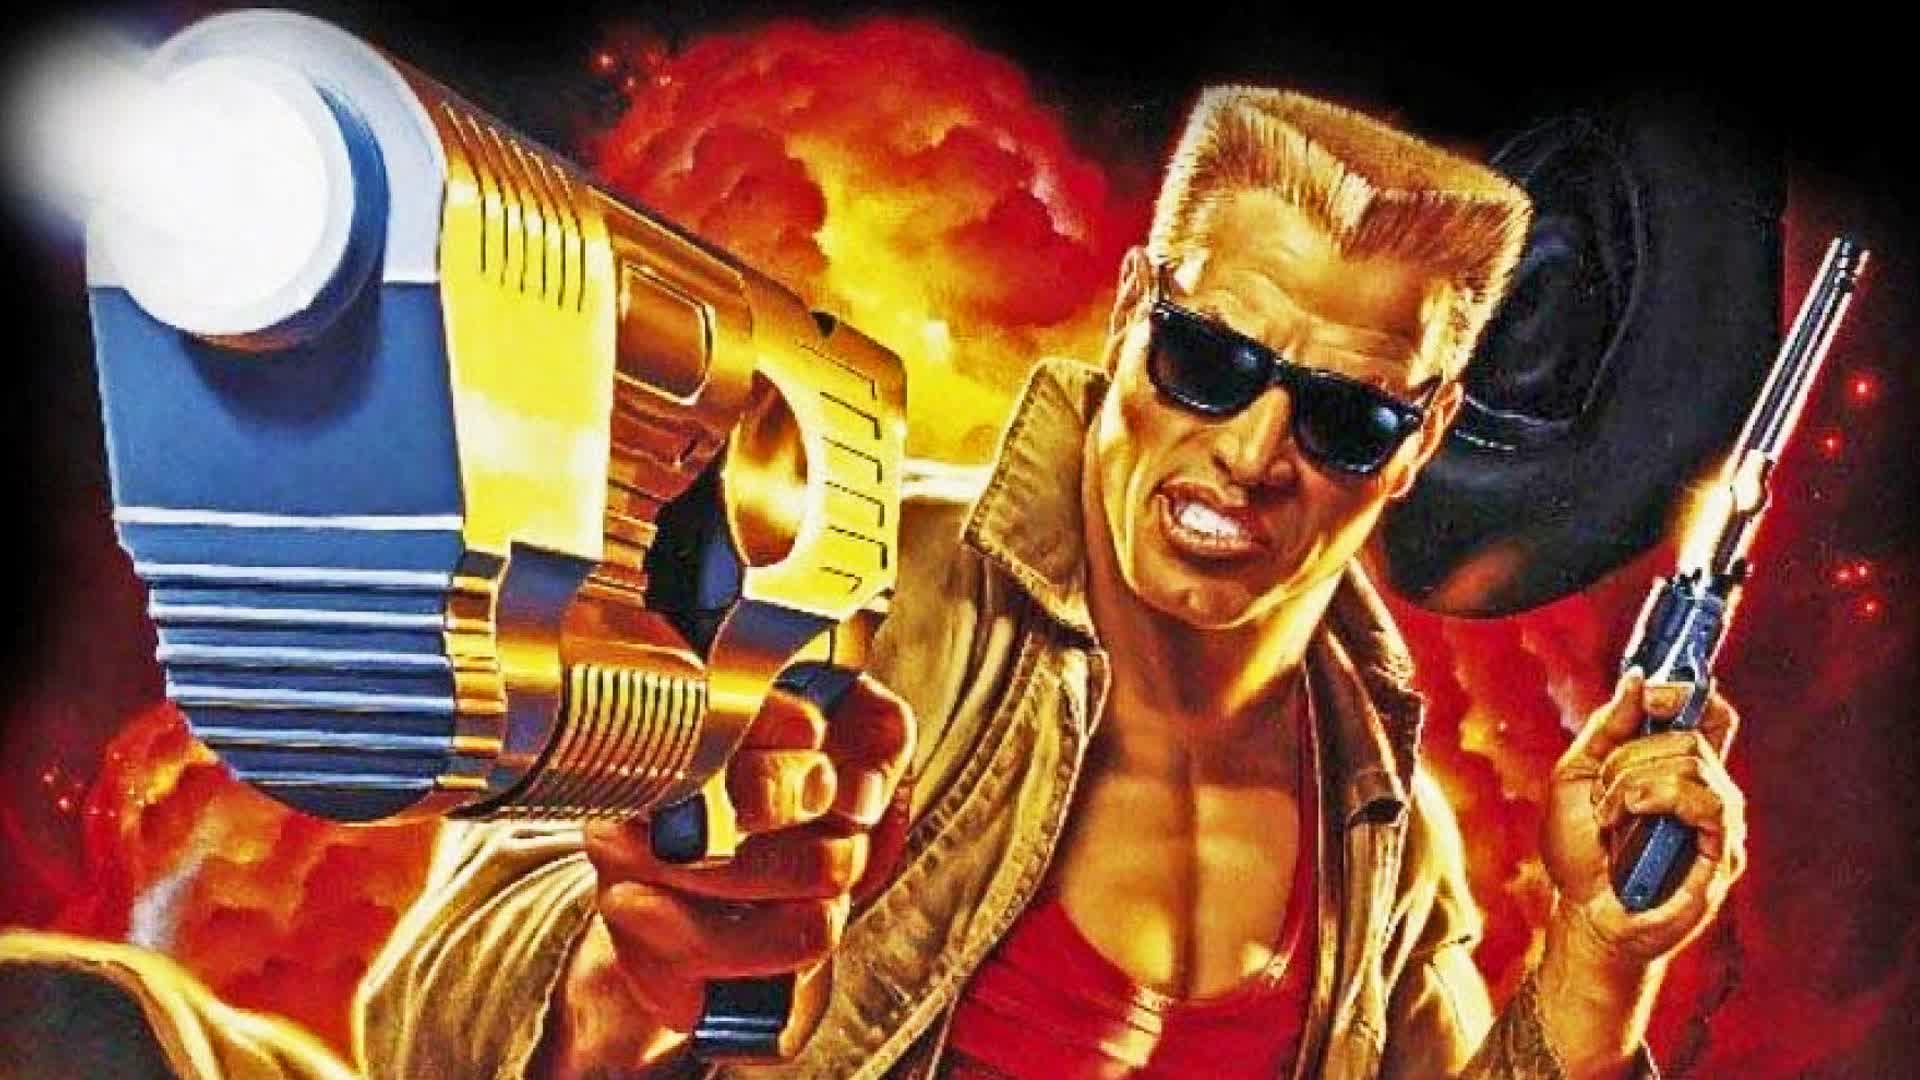 A Duke Nukem movie from the makers of Cobra Kai is on the way